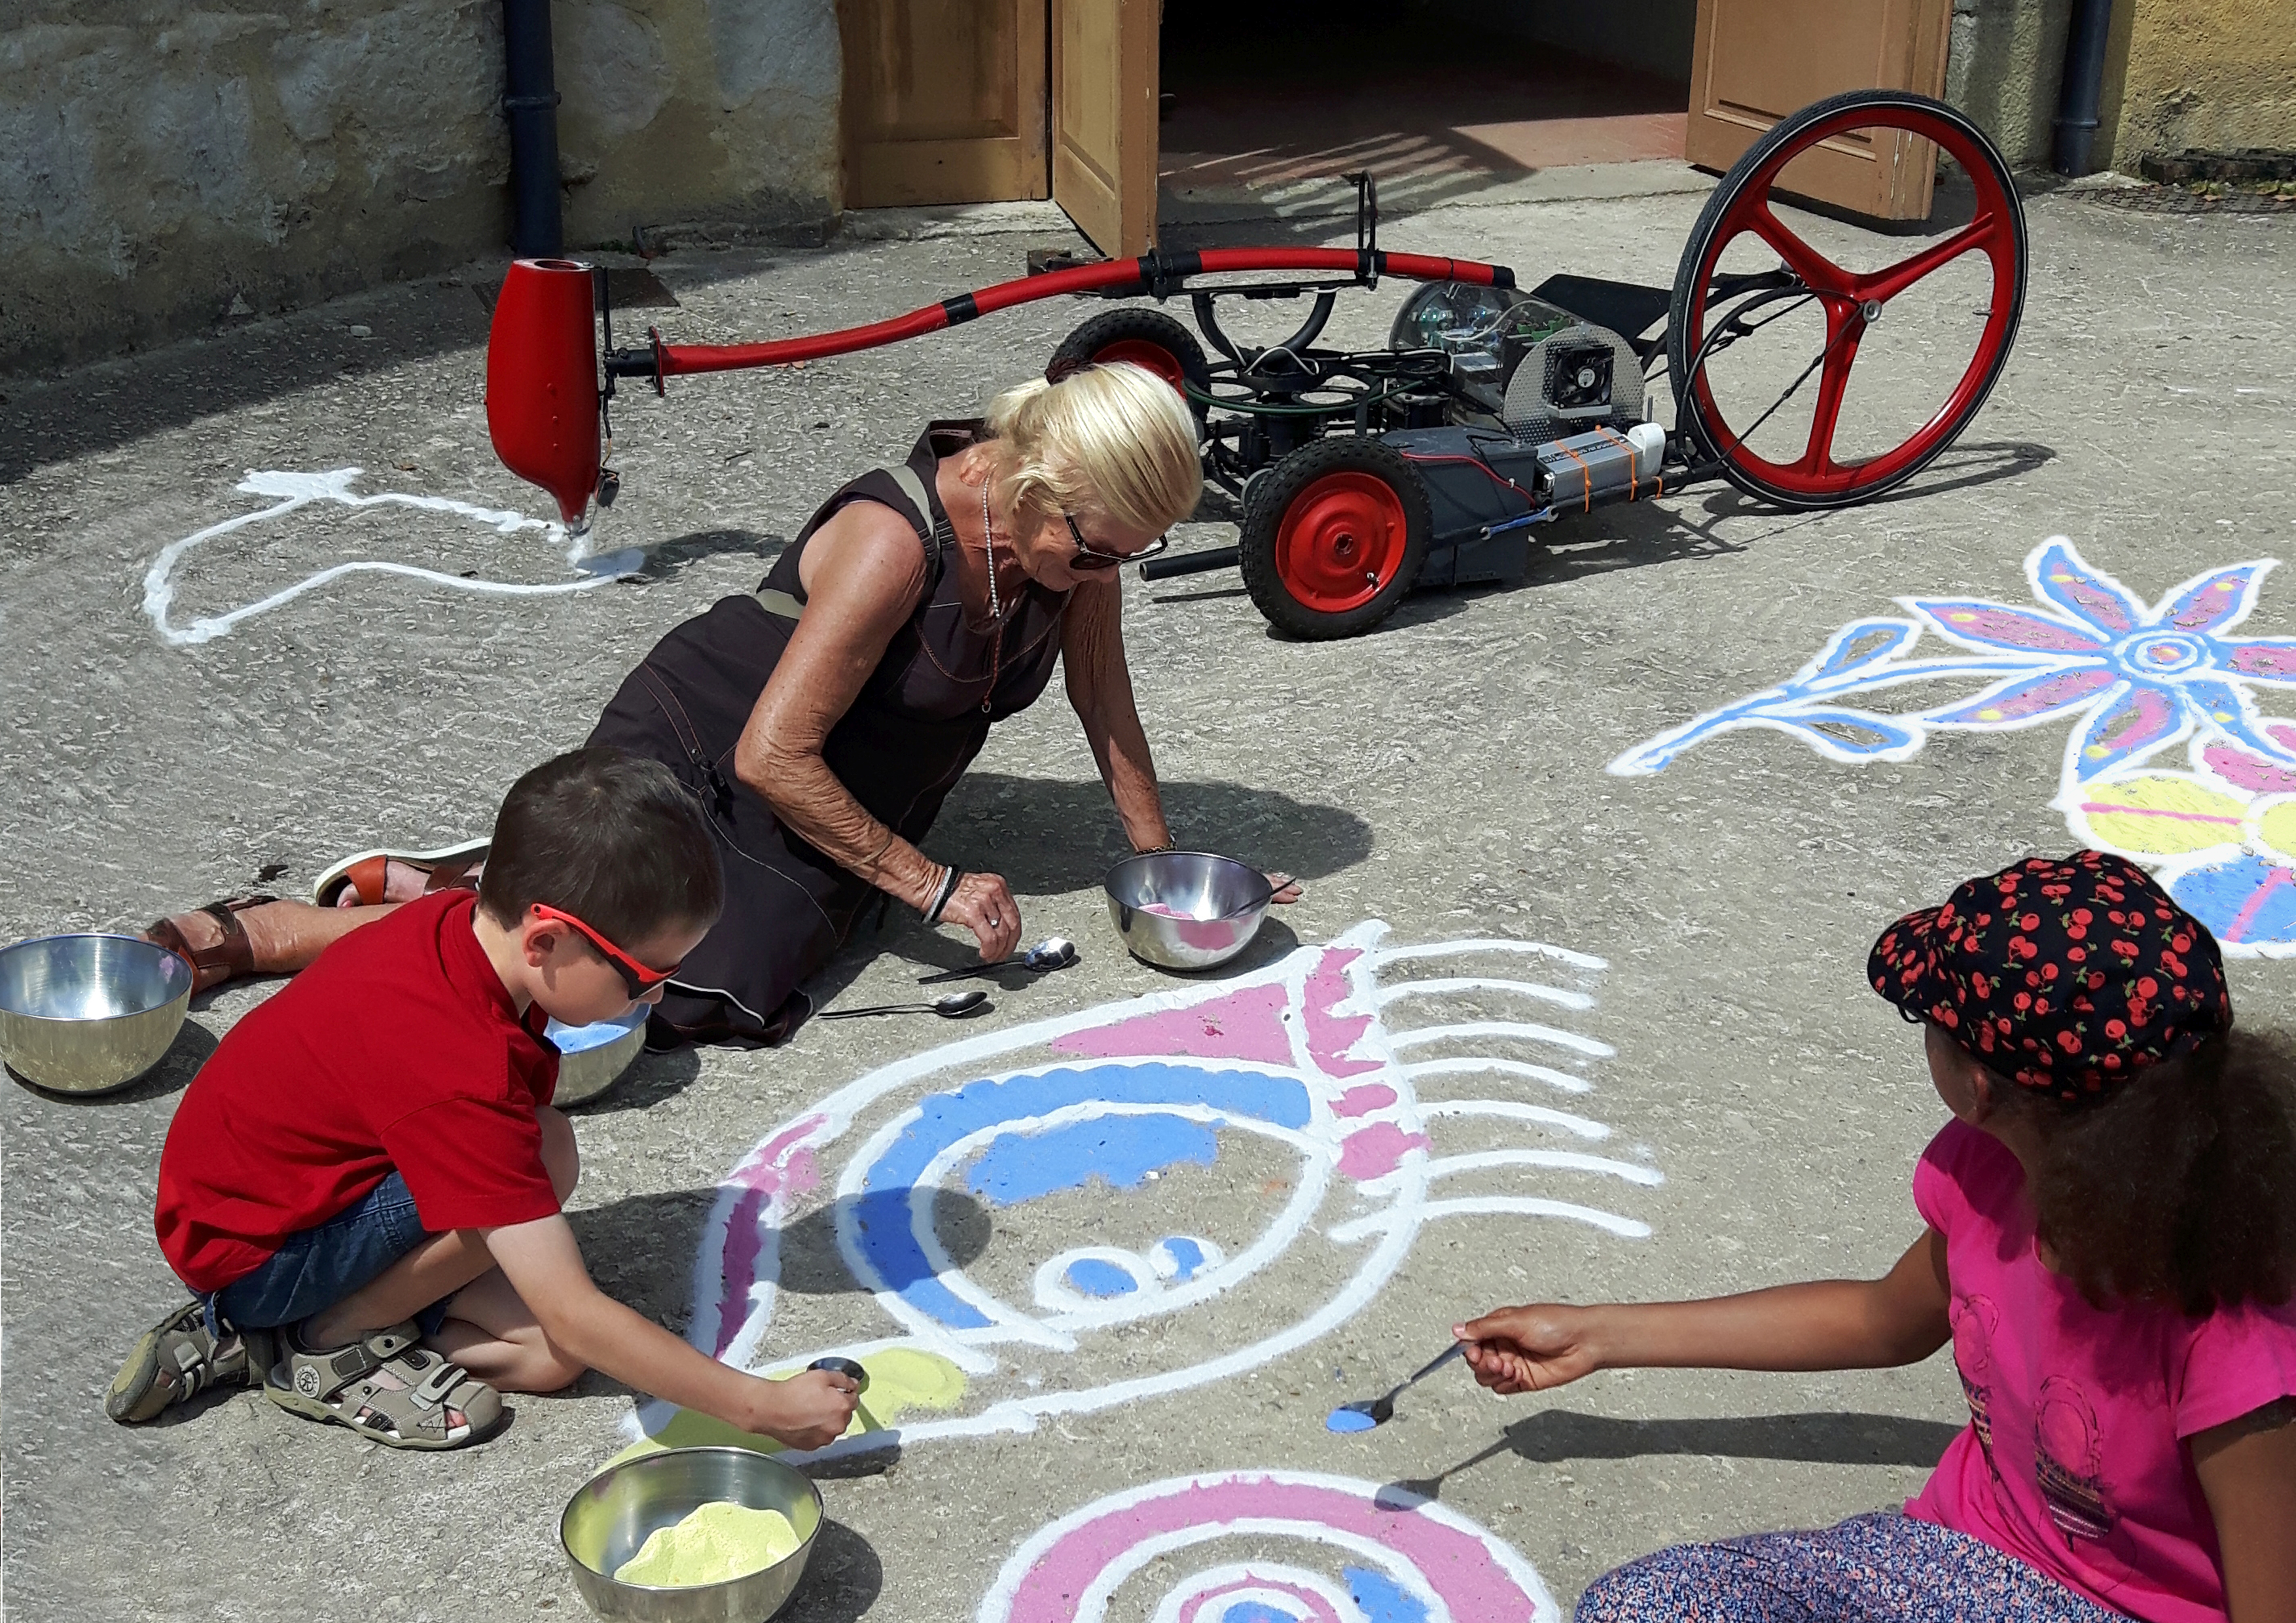 A woman and two children draw on a pavement with colourful chalk